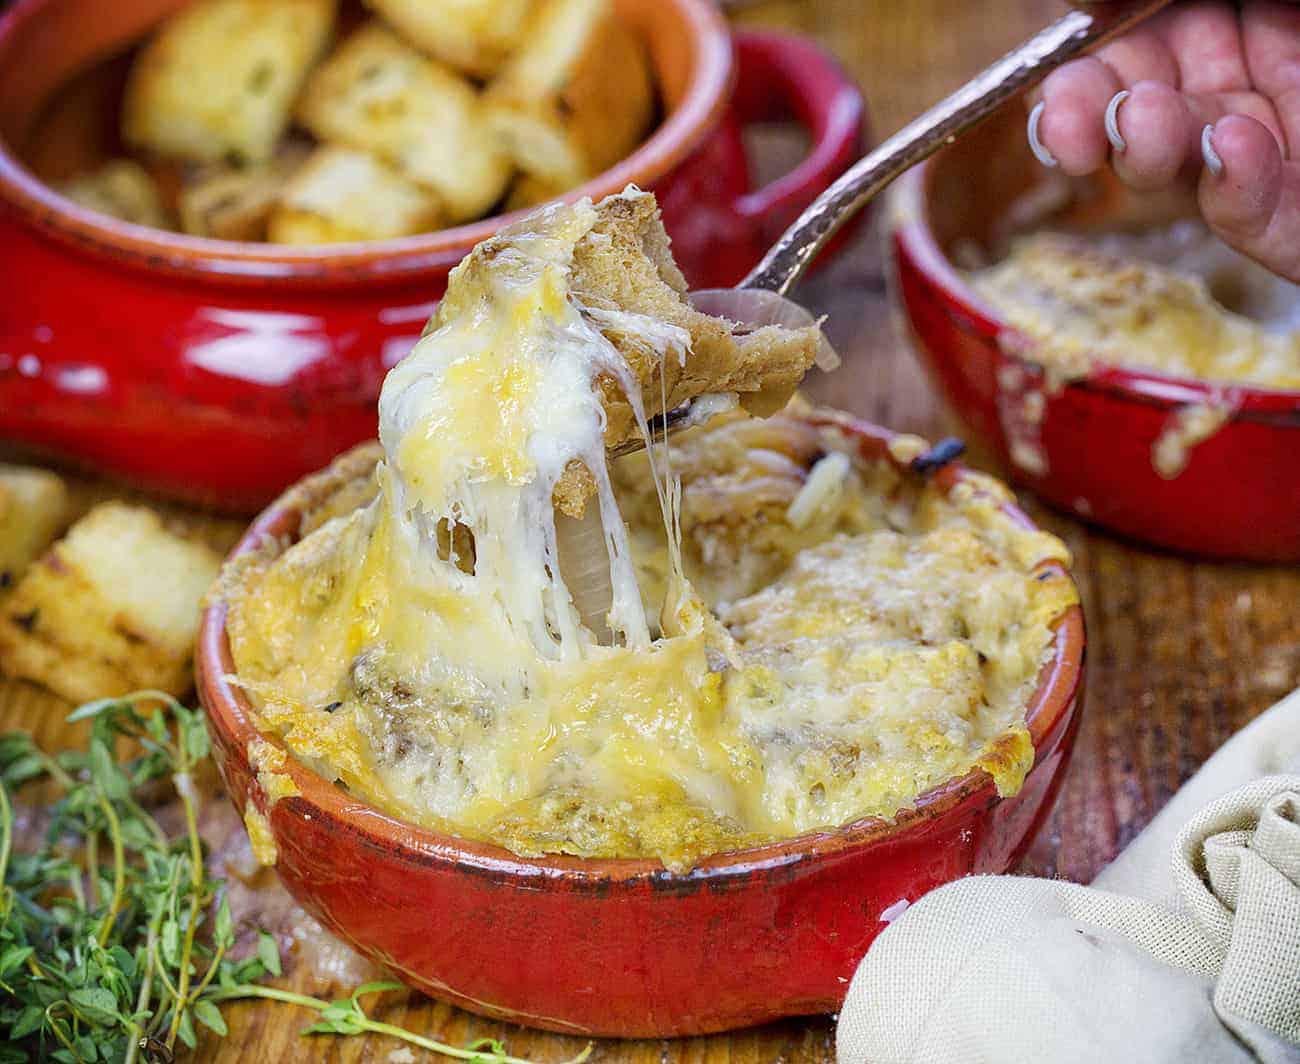 Perfect French Onion Soup Covered in Croutons and Melted Cheese